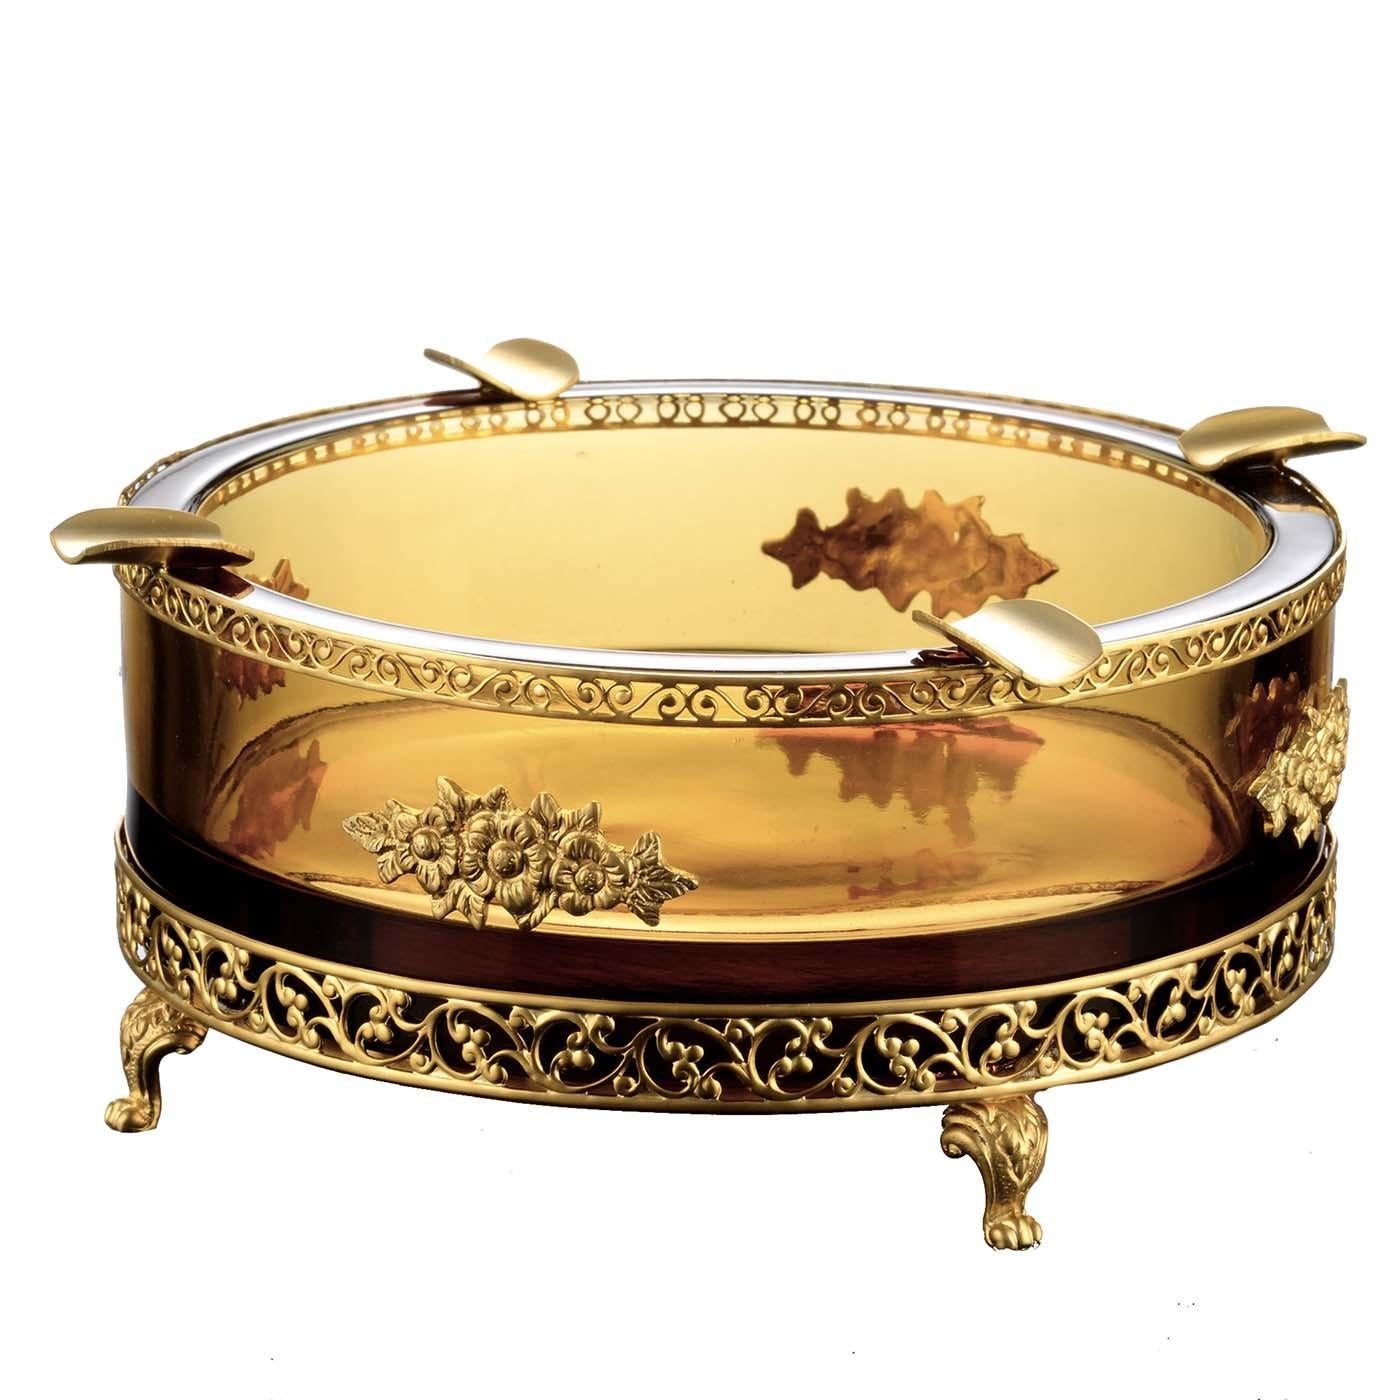 This magnificent ashtray was crafted of 24 PbO crystal with a delicate shade of amber and will make a statement in a classically furnished living room or study. Its simple silhouette is enriched by a clawfoot base in satin gold-finished bronze,